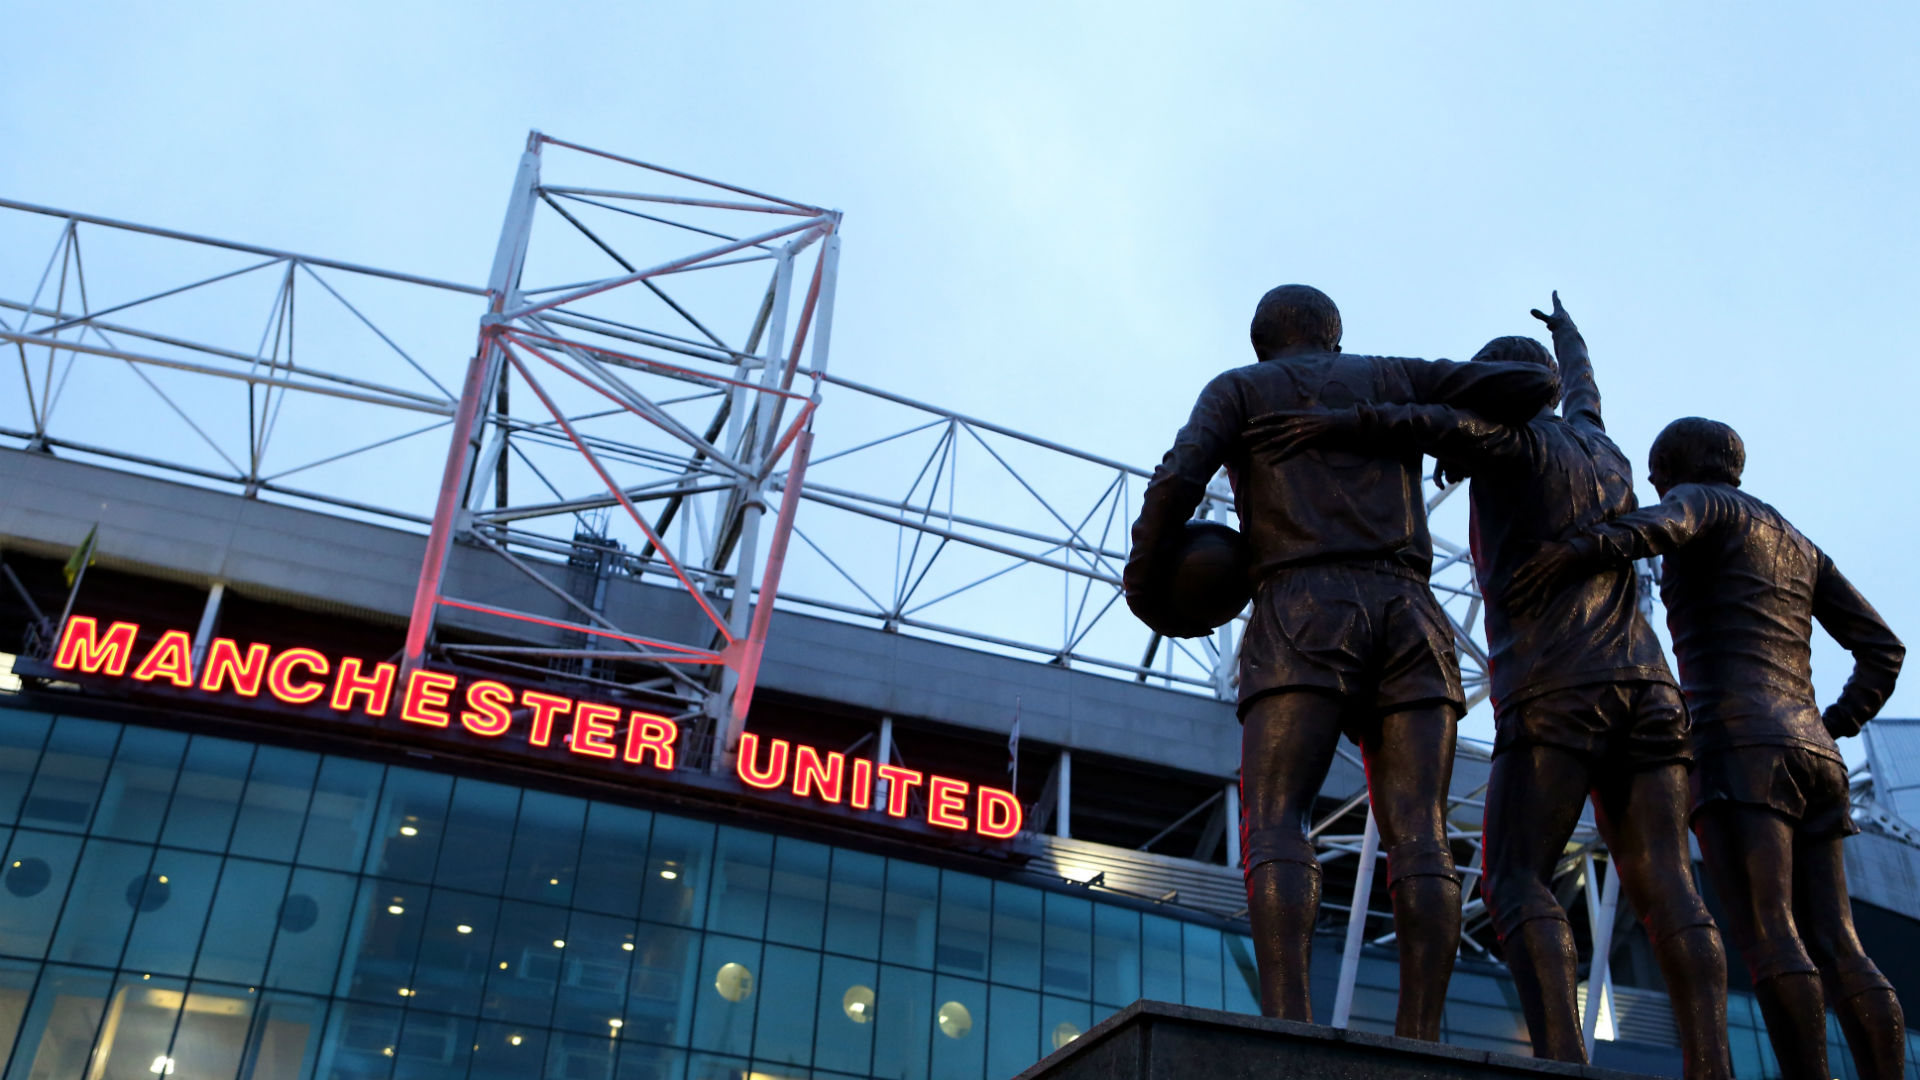 Manchester United in ongoing discussions with NHS to help during Covid-19 outbreak